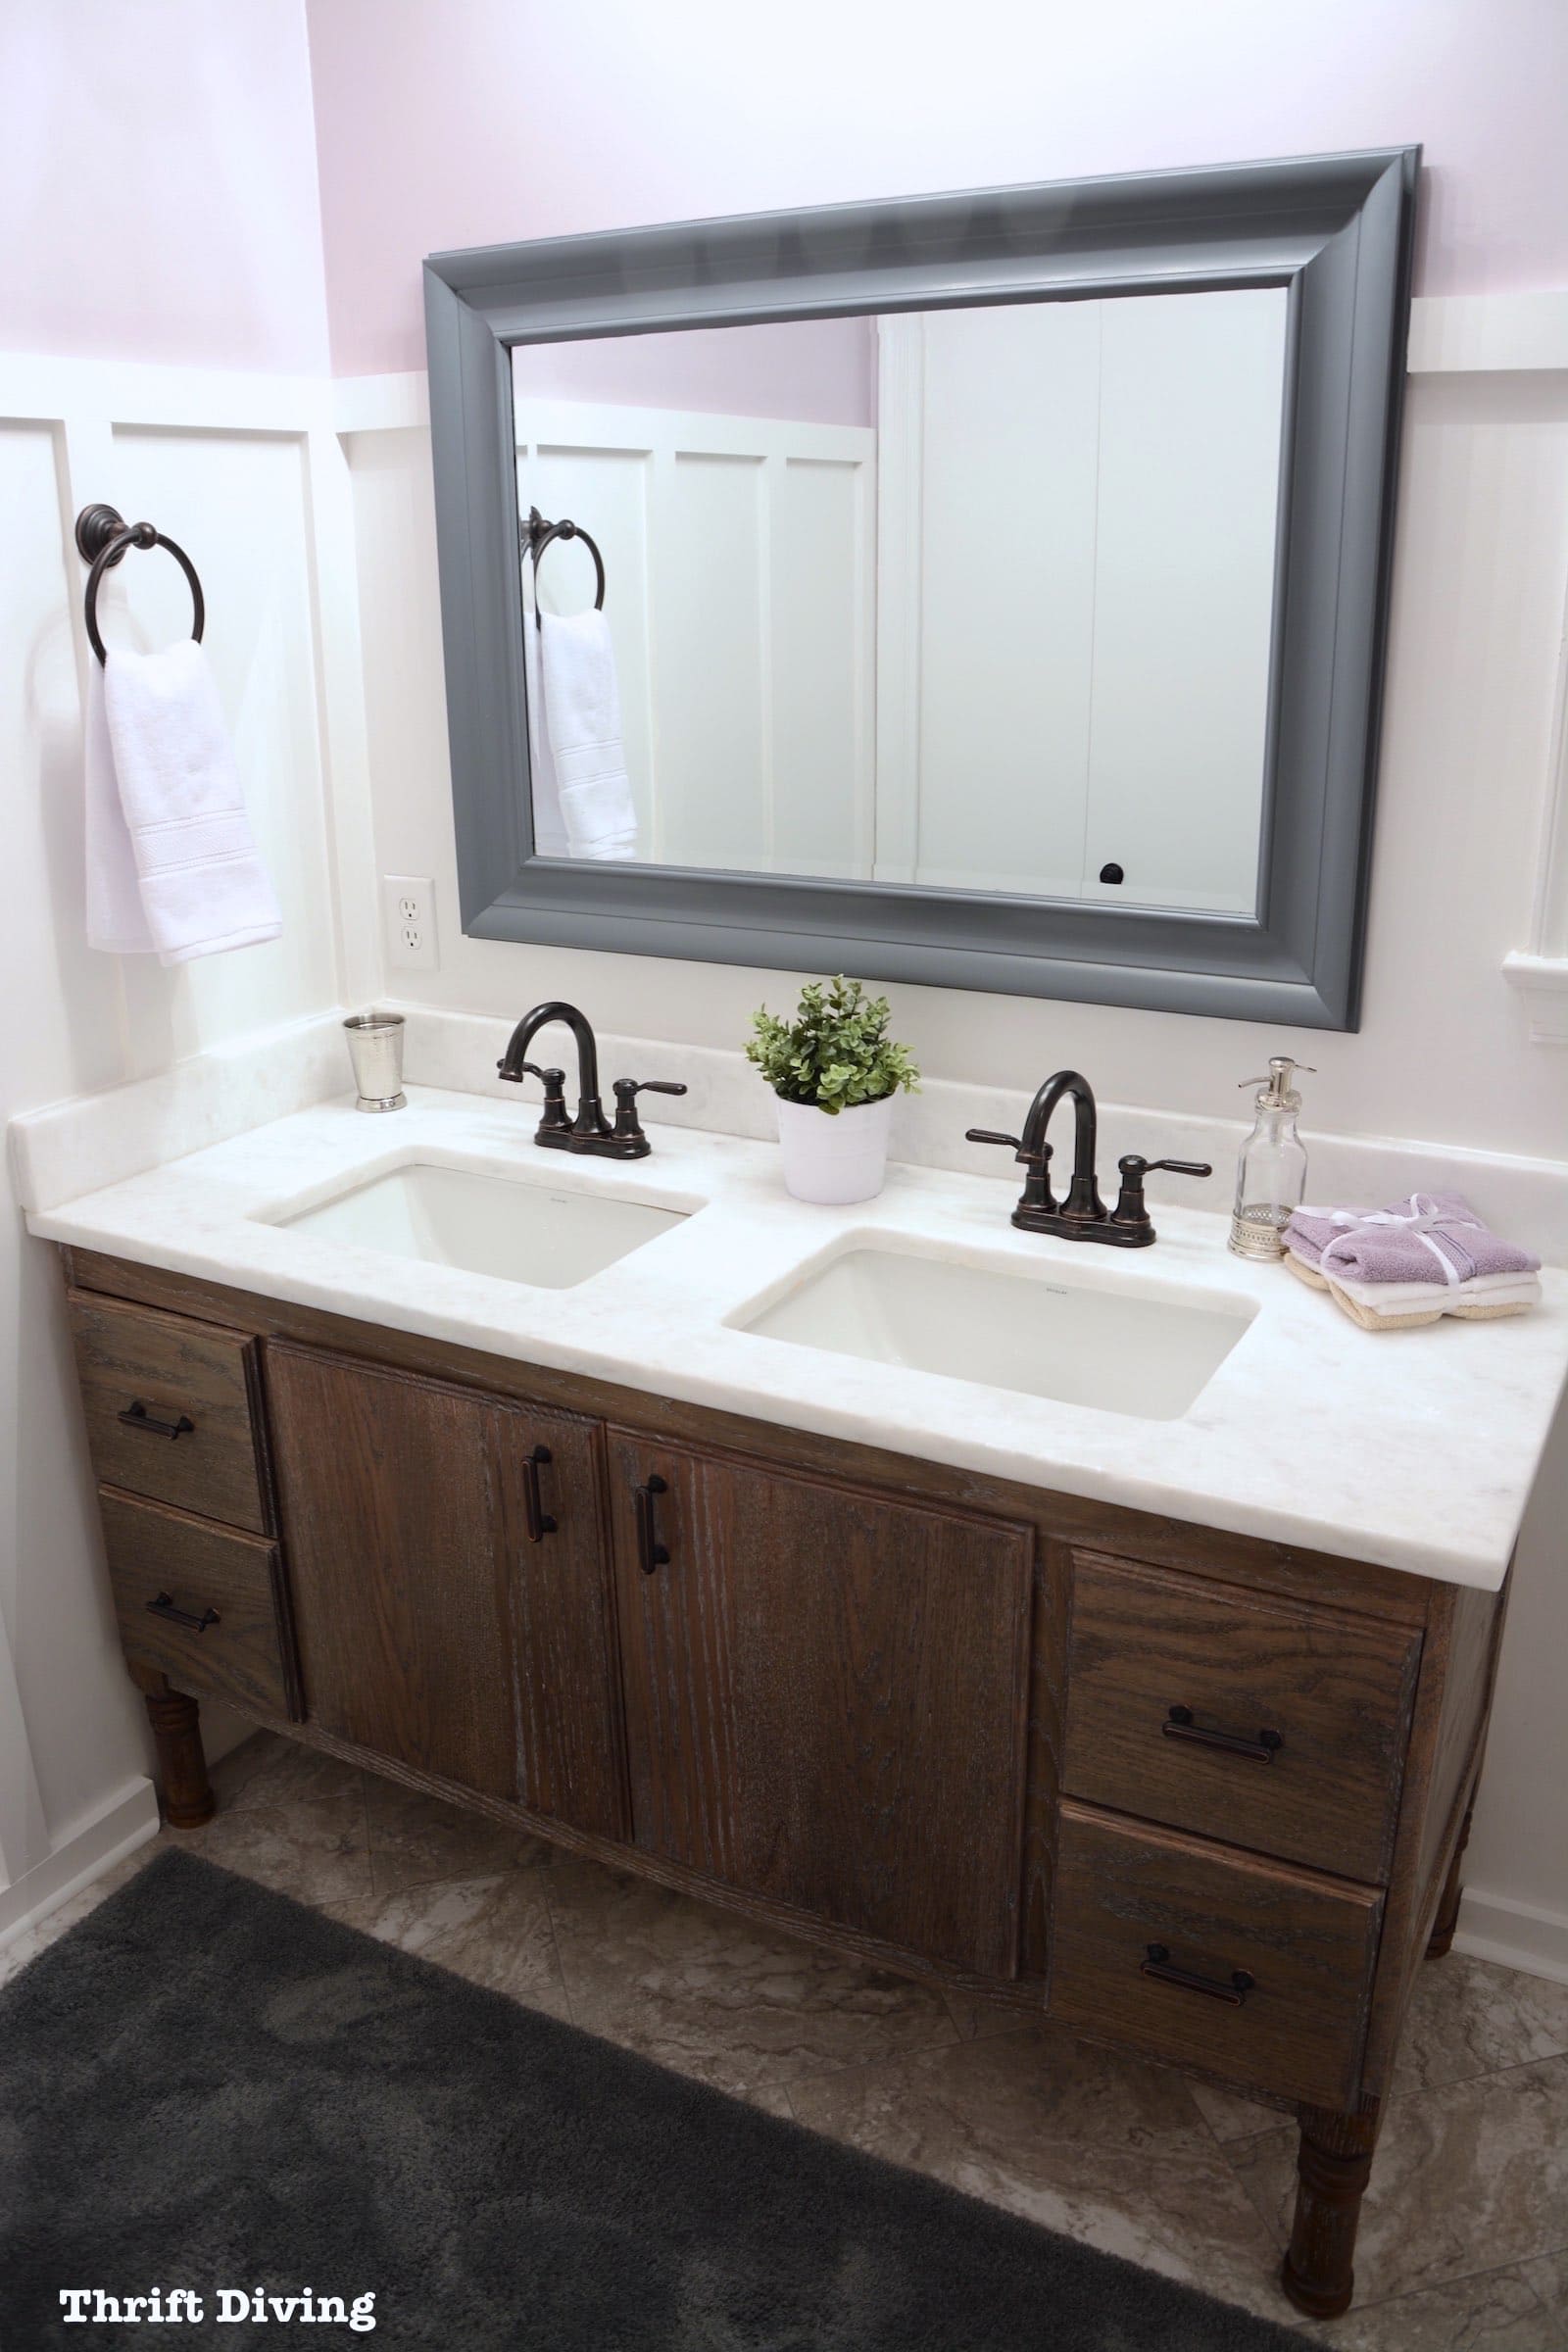 Learn how to create a custom DIY bathroom vanity from scratch - including complete step-by-step details! - Thrift Diving